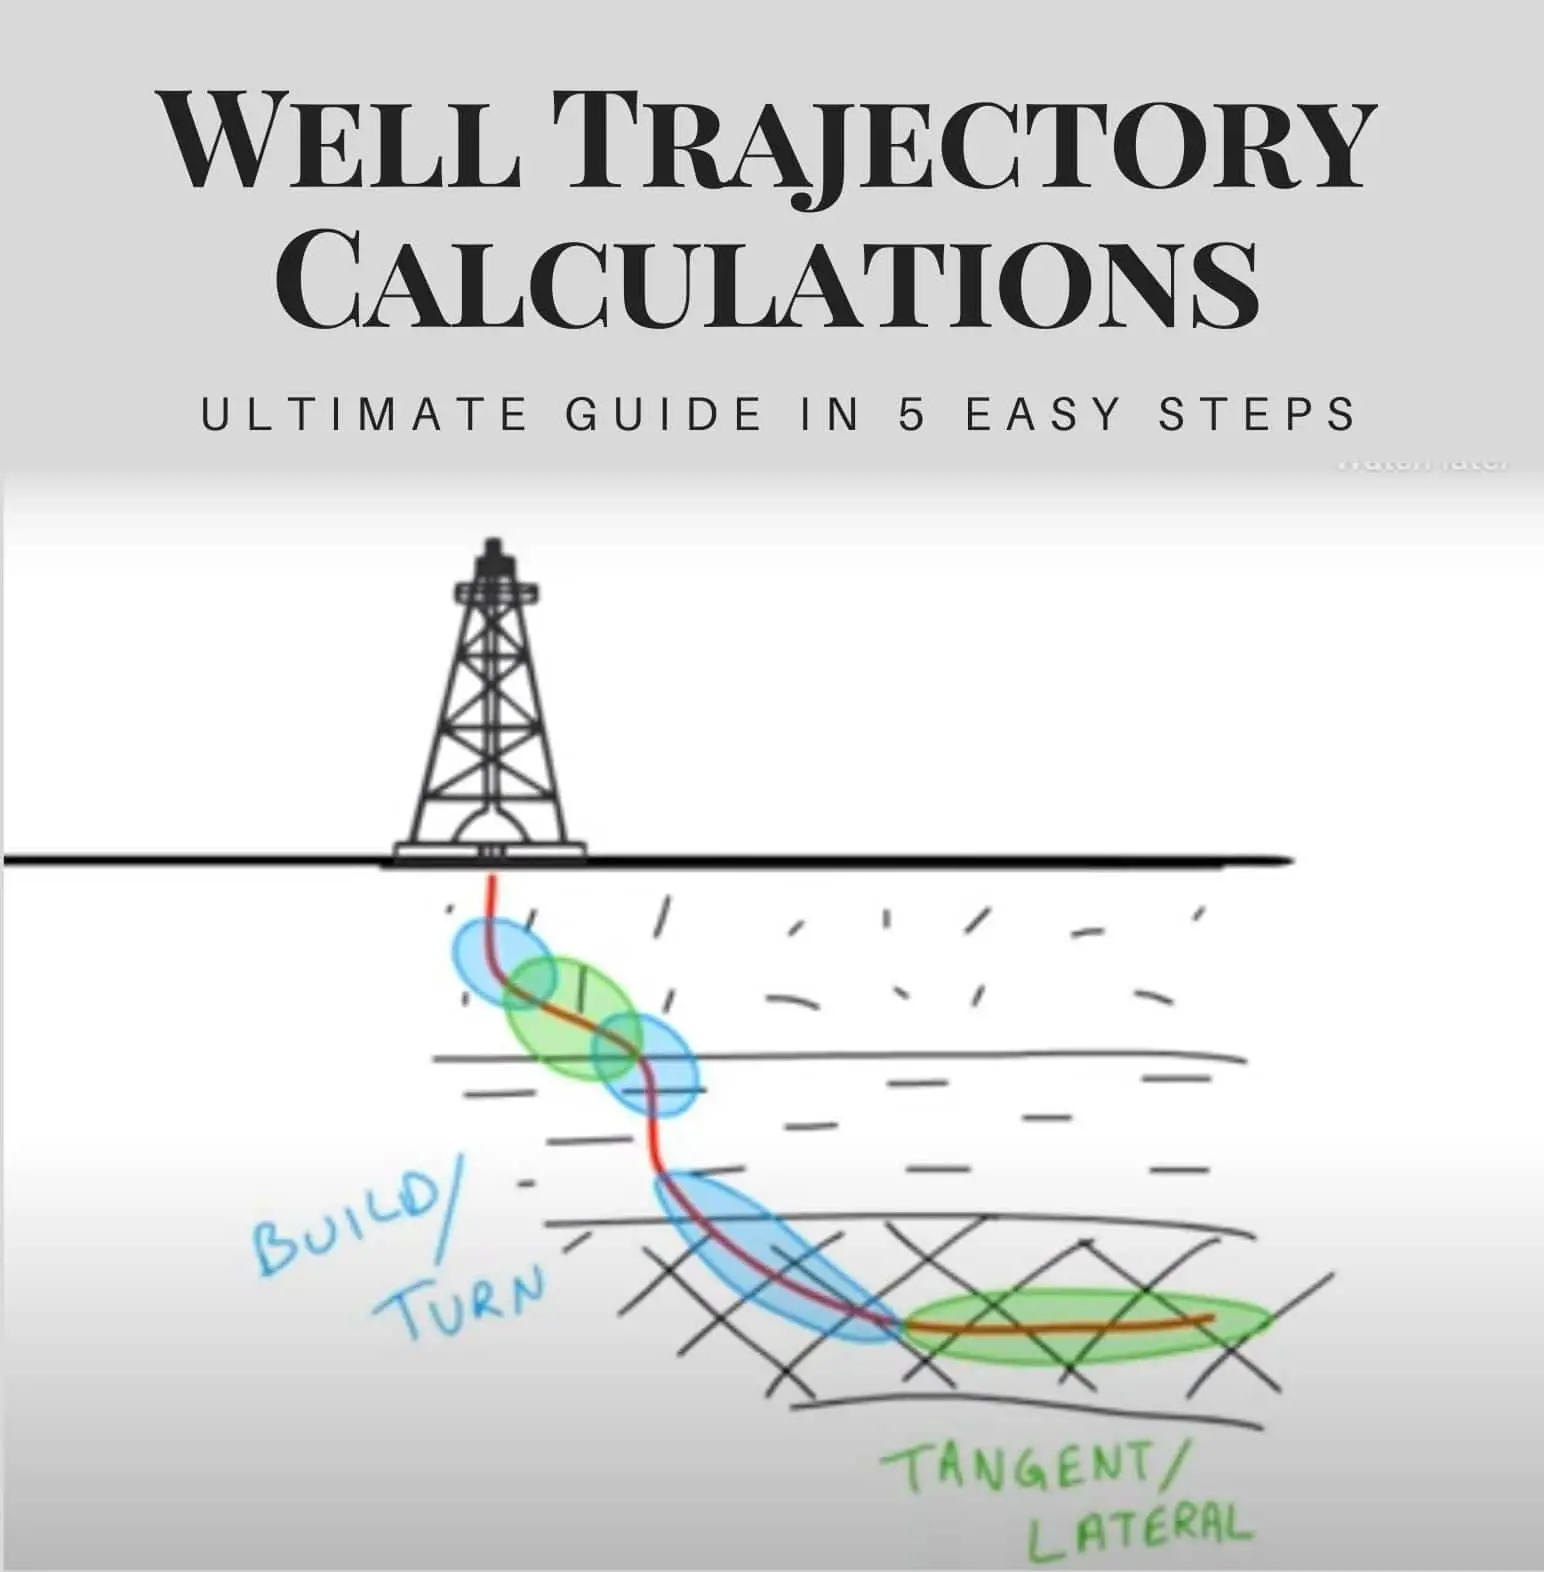 Directional Drilling planning trajectory survey calculations